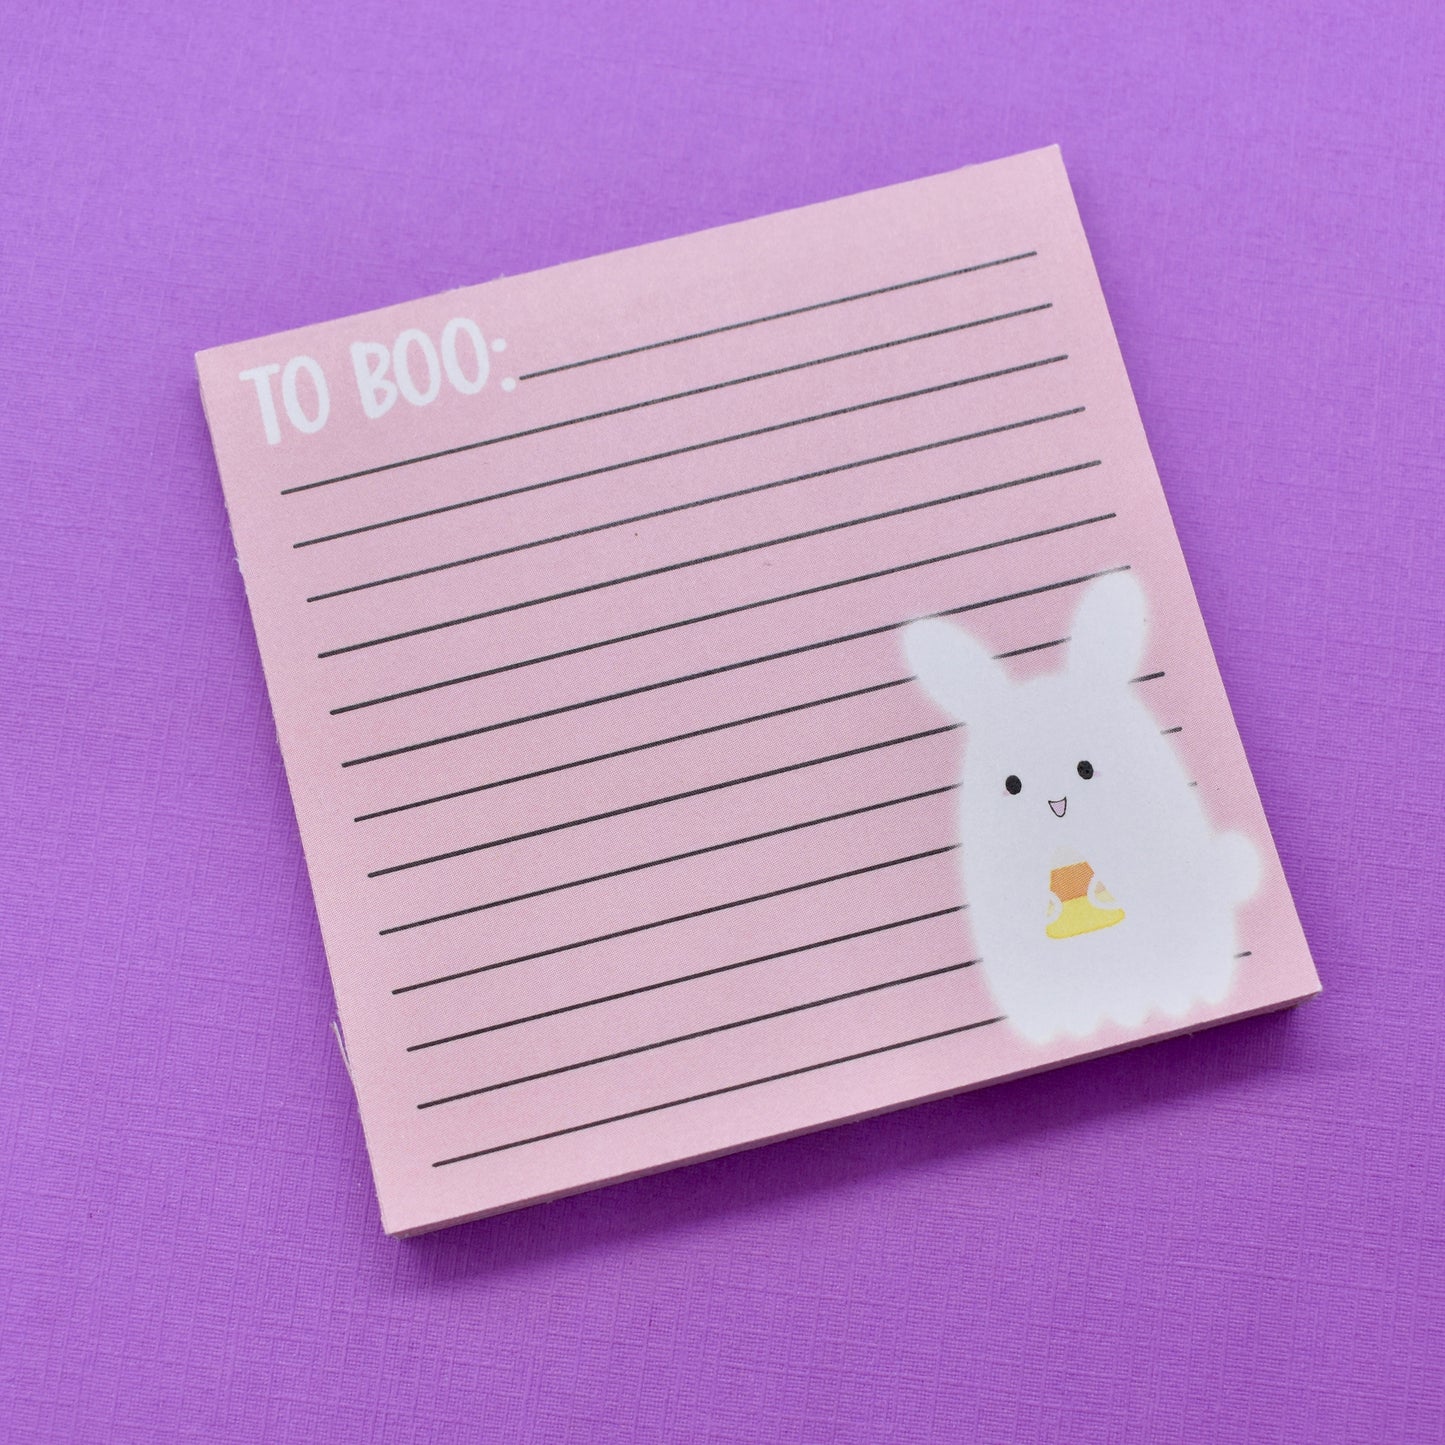 To BOO Notepad